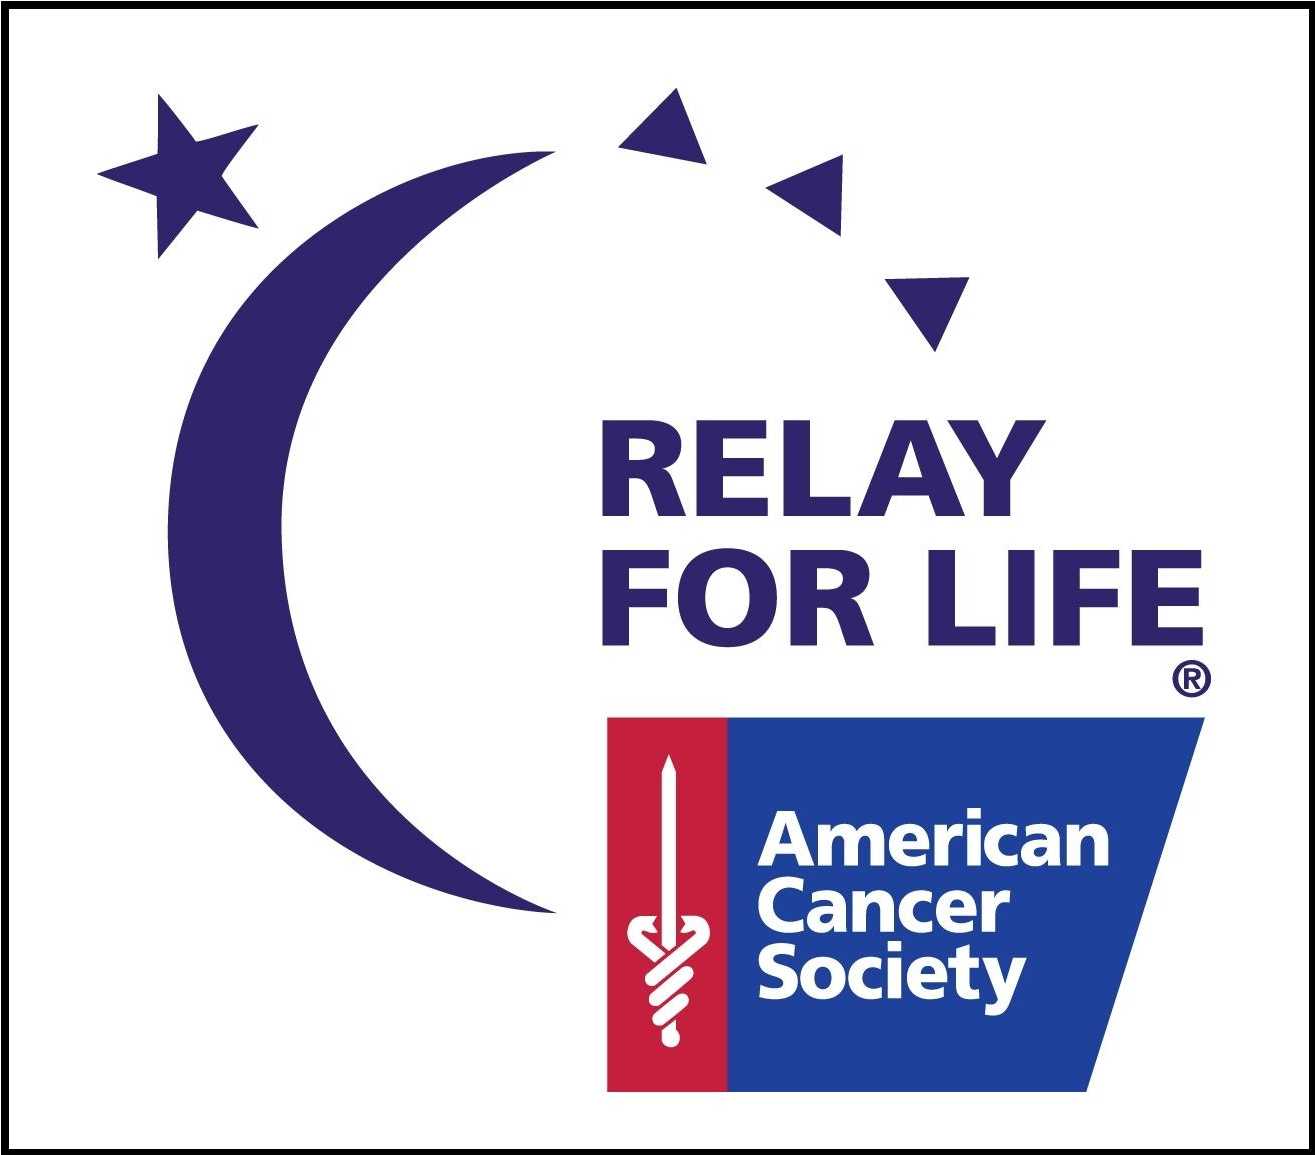 Relay for Life of Miami 5K benefiting the American Cancer Society